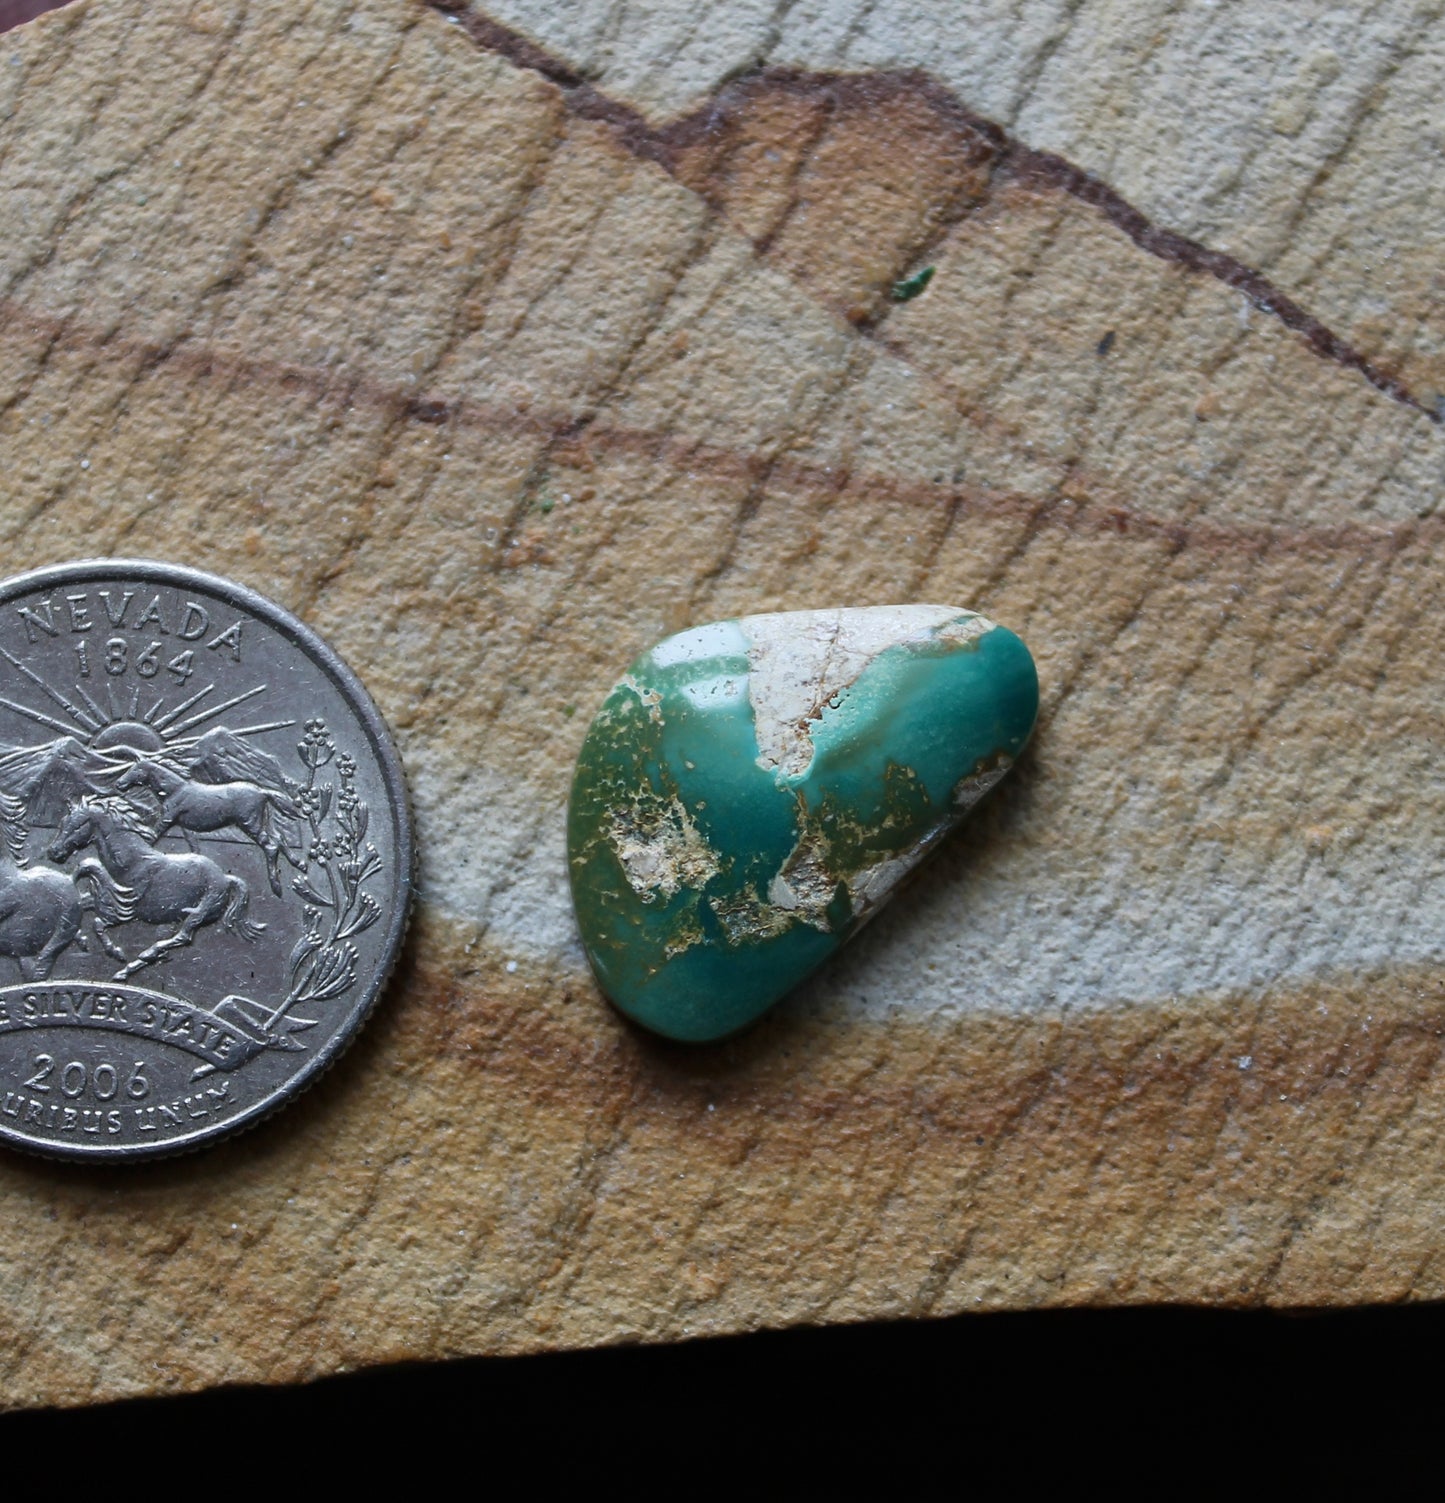 8 carat green Stone Mountain Turquoise cabochon with matrix